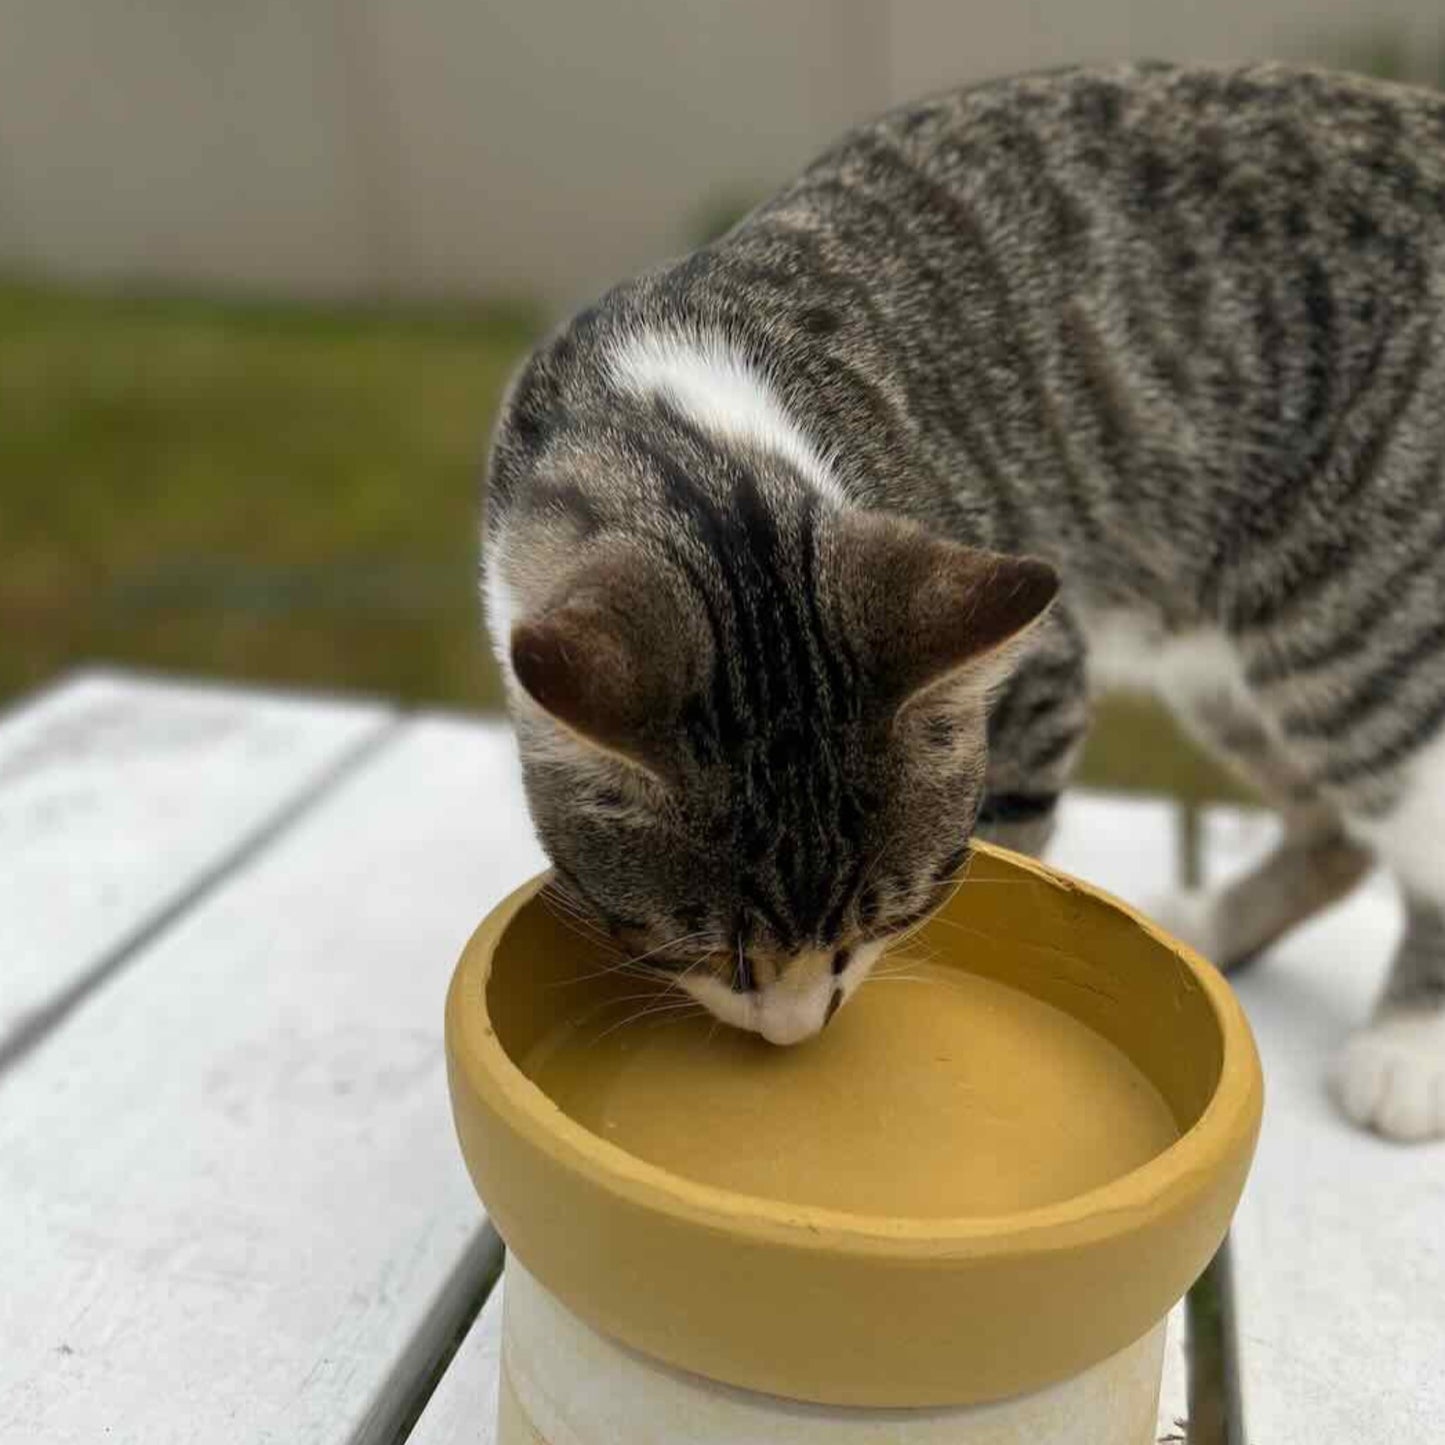 Billy having a drink from his test run bowl before it has been glazed. 